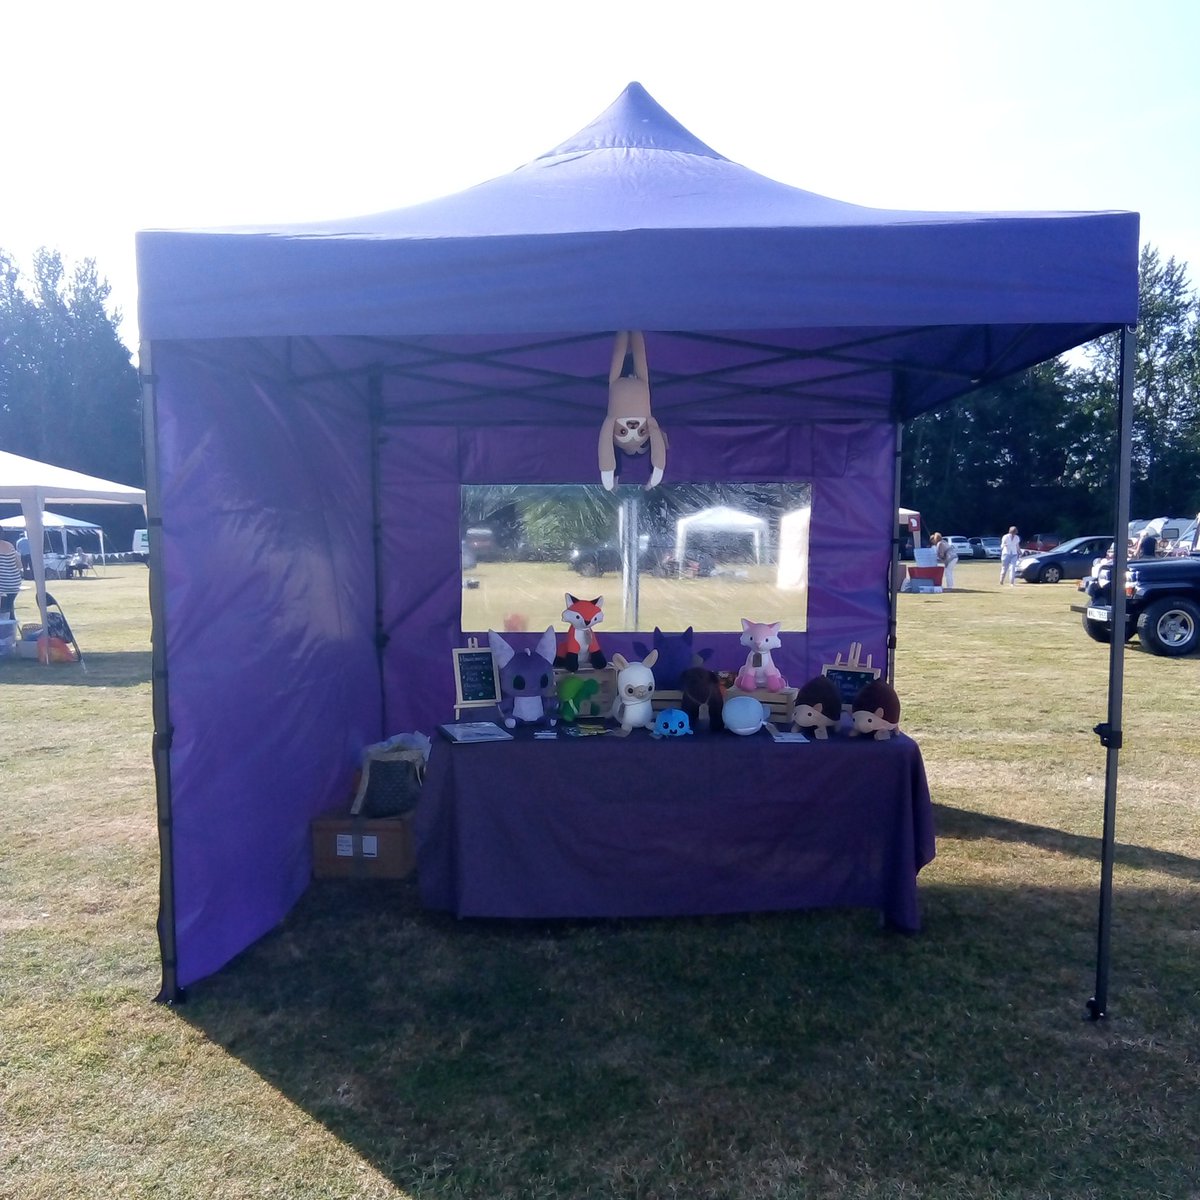 We're heeeeere! All set up and ready to trade at @wildliferescuer in my lovely new gazebo - come and say hi! =) #plushies #softtoys #handmade #openday #funday #animals #wildliferescue #Gloucestershire #gloucestershireevents #valewildlifehospital #valewildliferescue